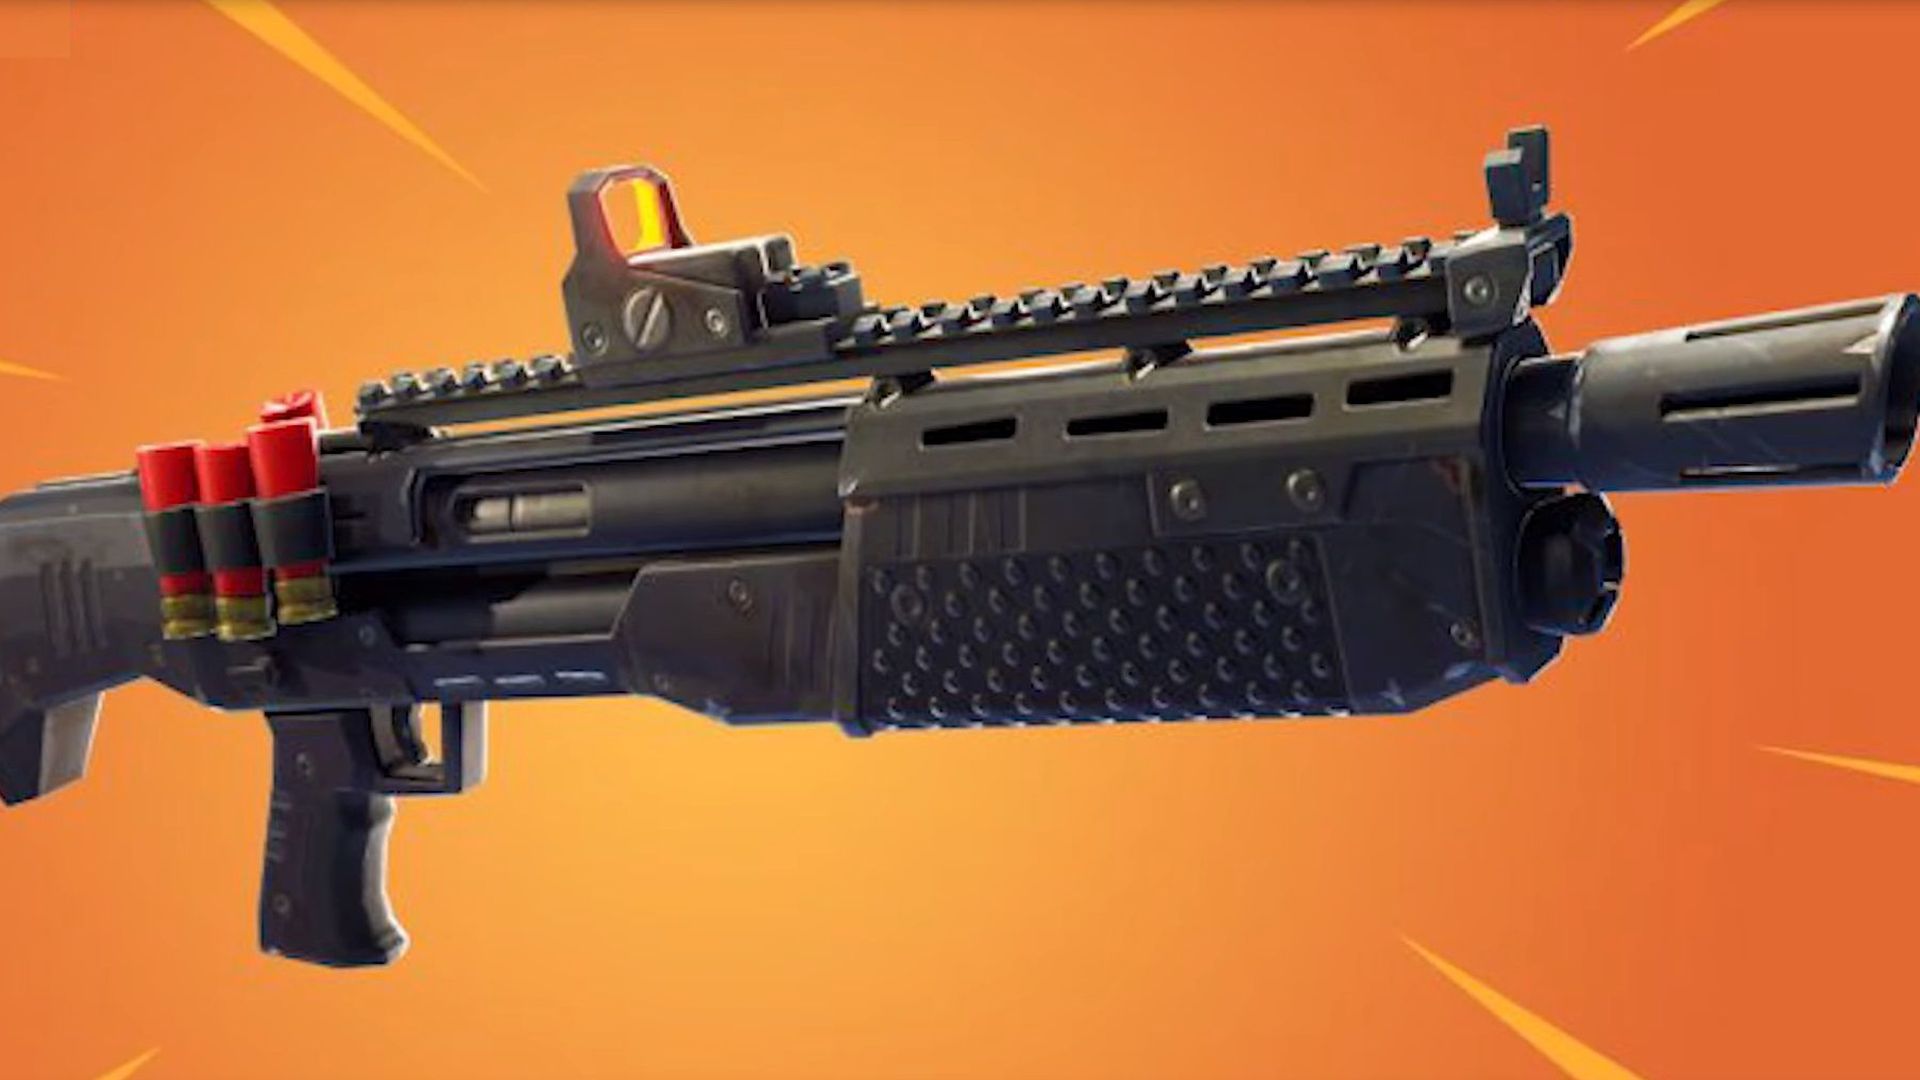 Can You Name Every Gun in Fortnite from One Photo?